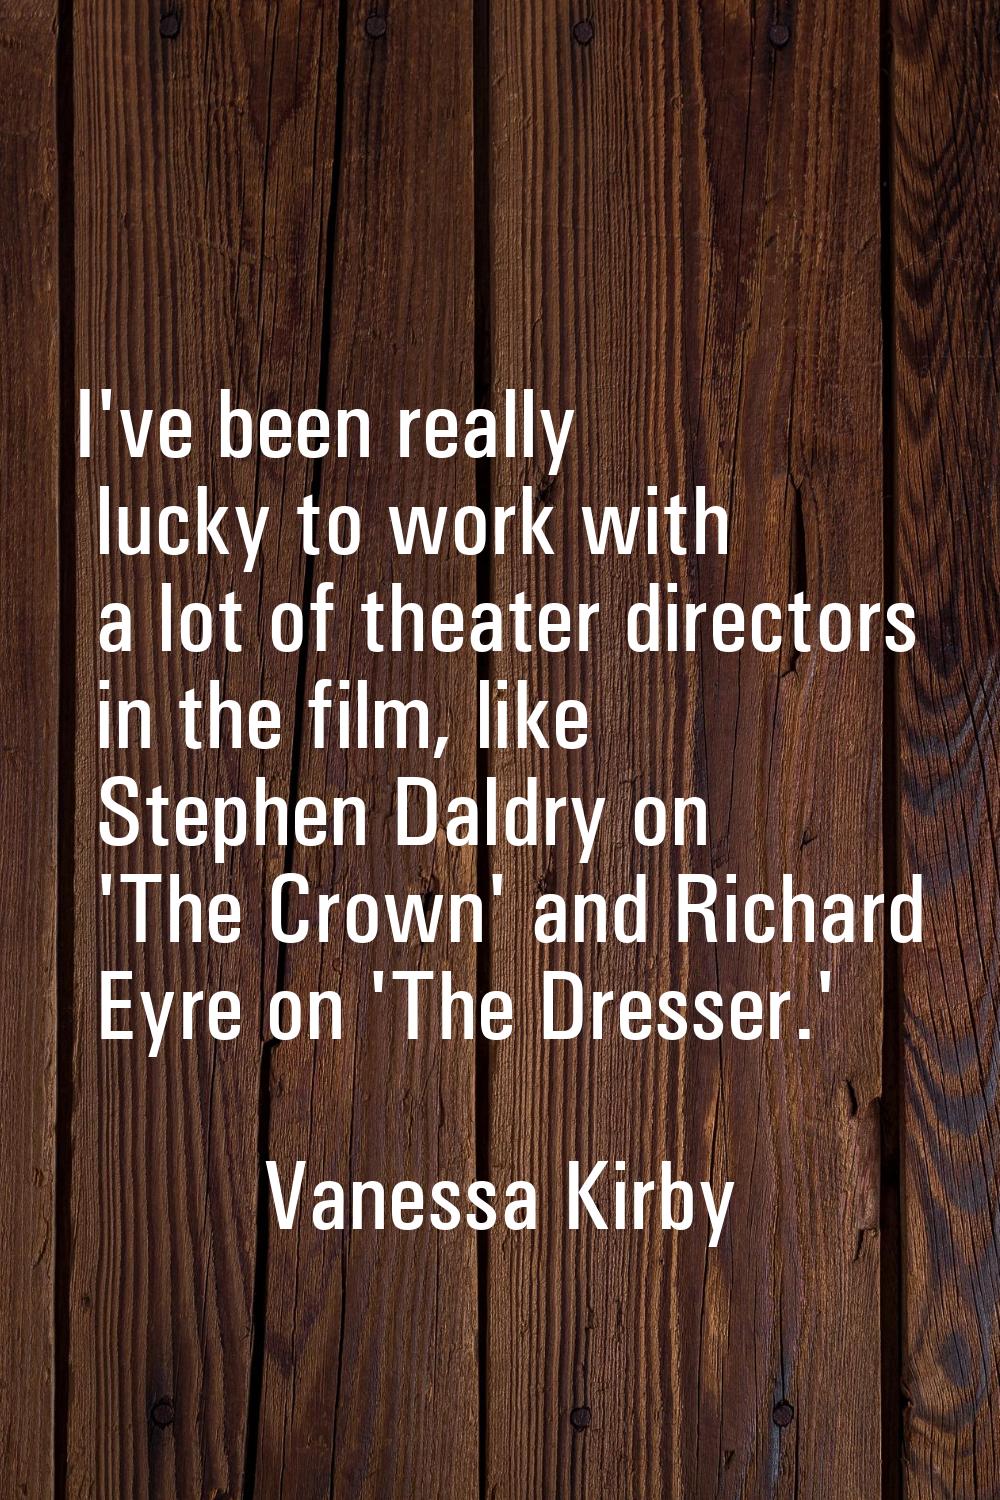 I've been really lucky to work with a lot of theater directors in the film, like Stephen Daldry on 